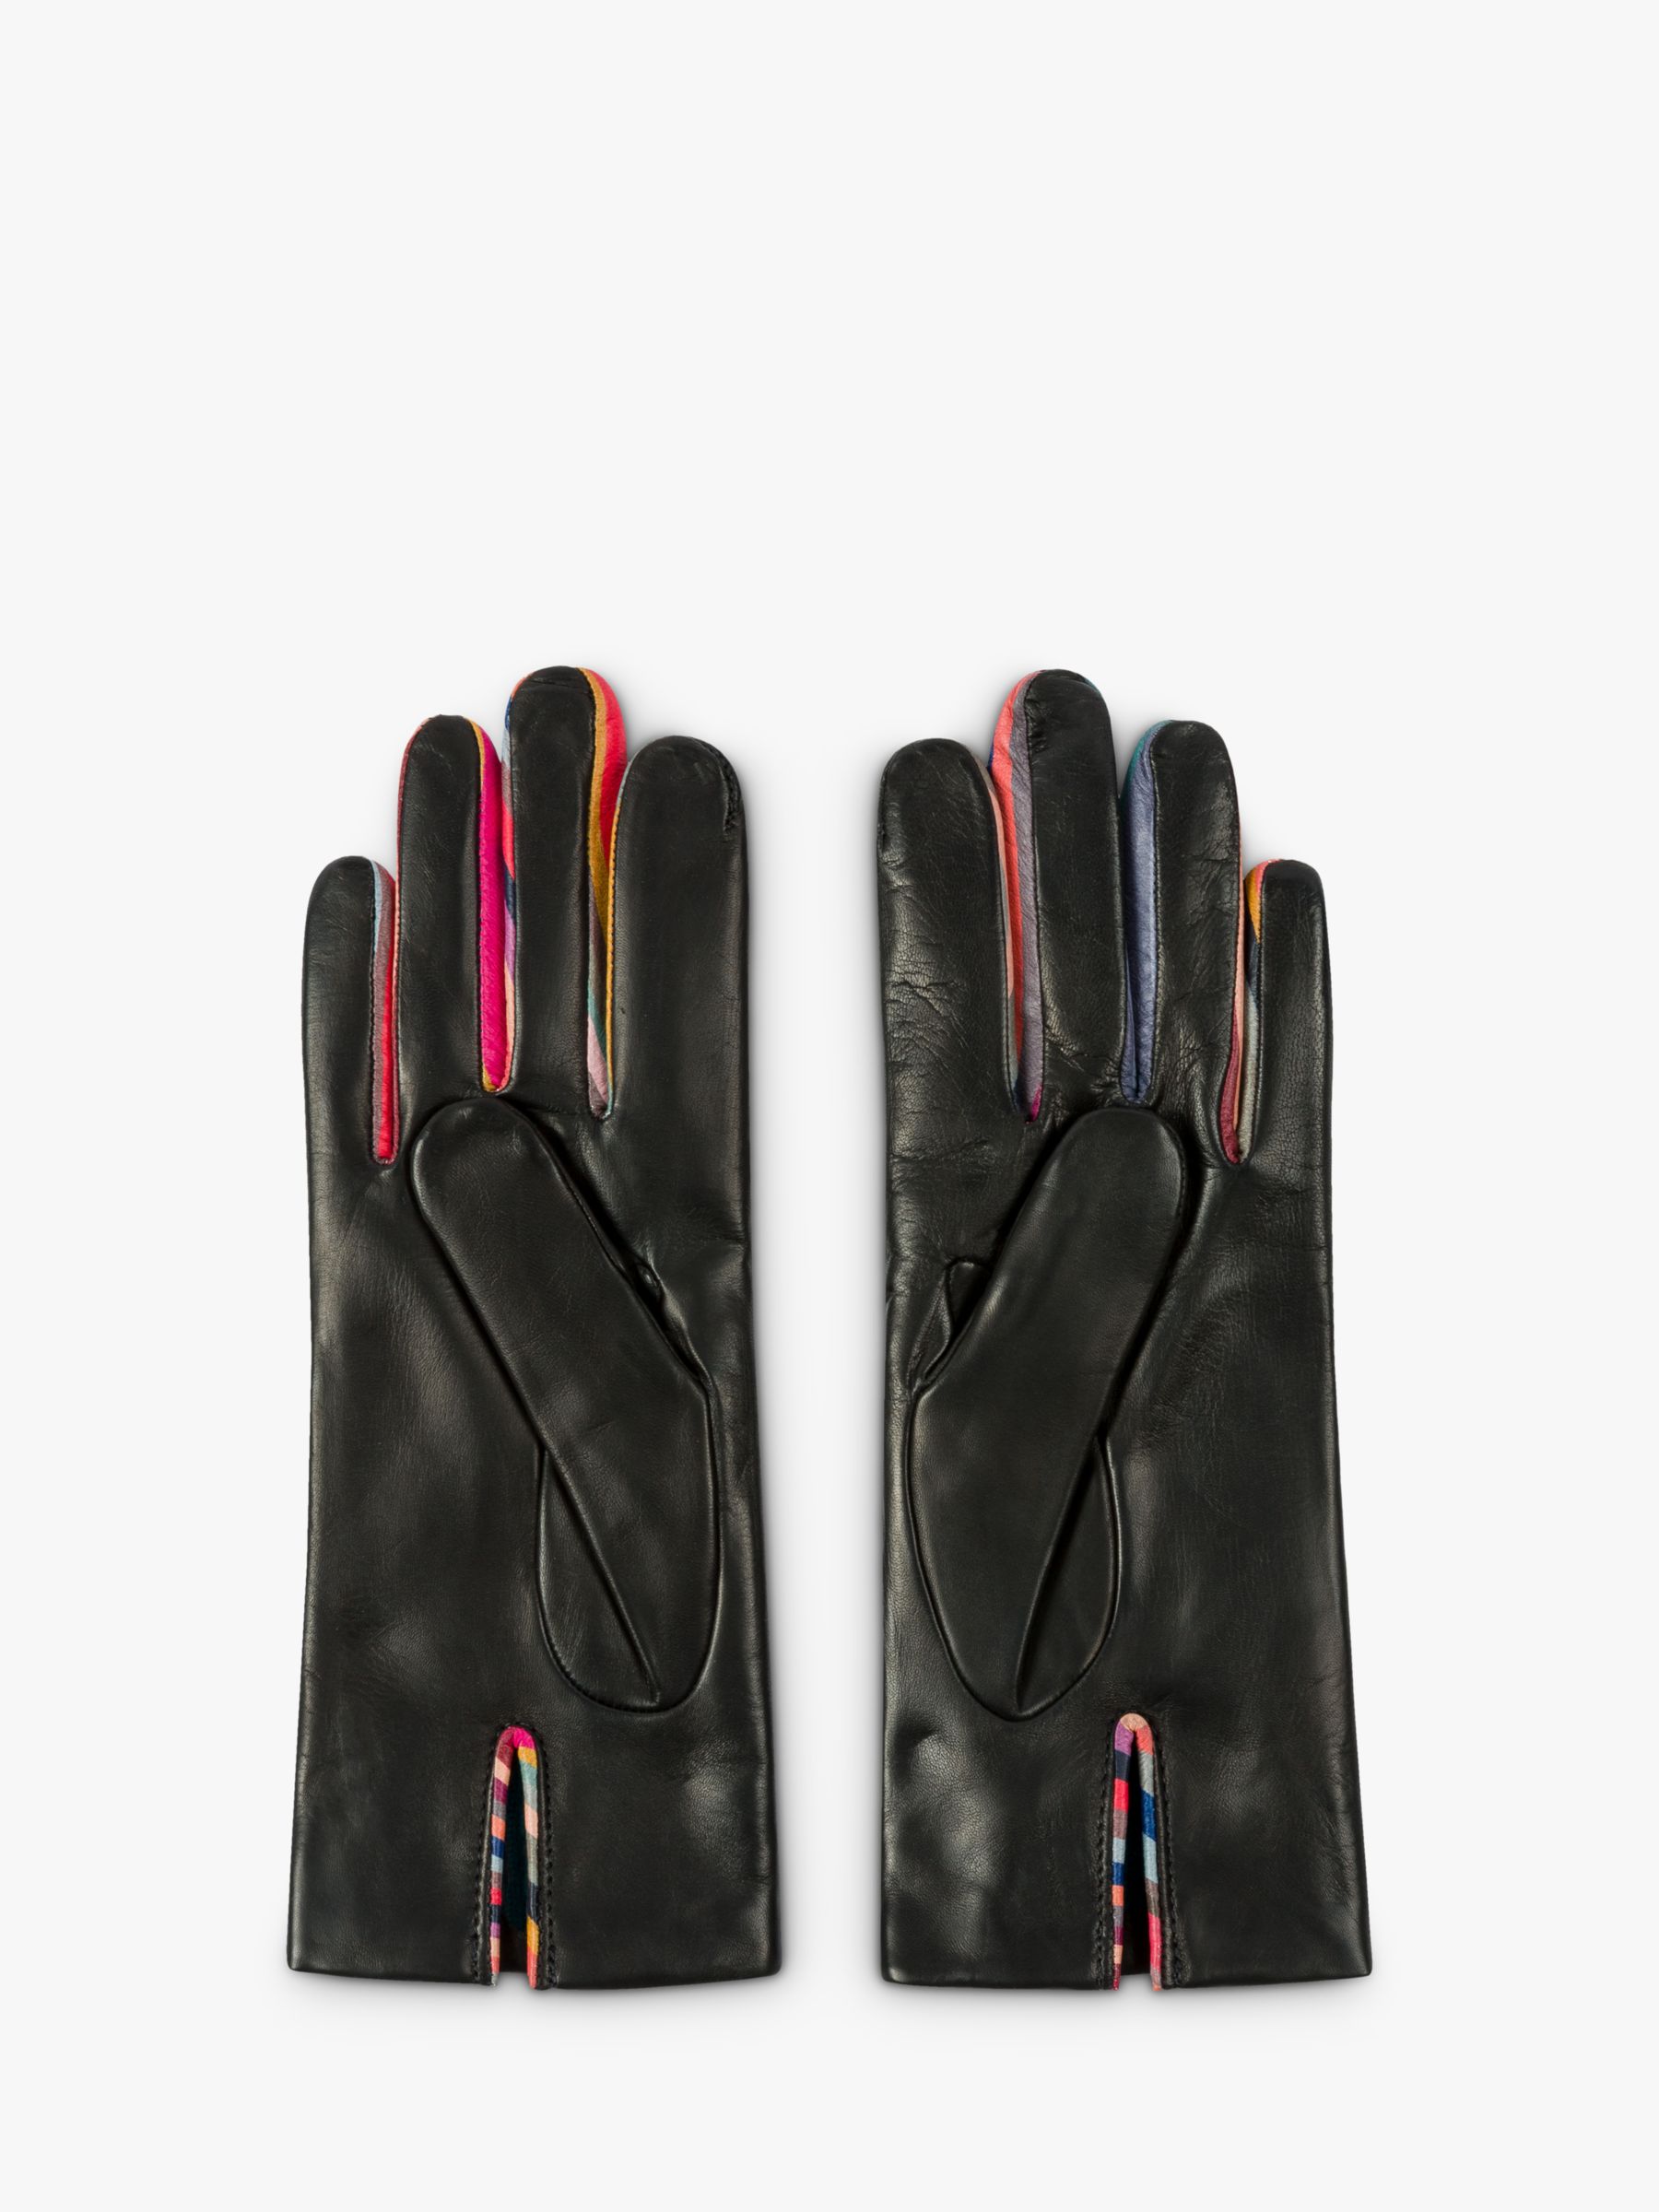 Paul Smith Swirl Stripe Leather and Cashmere Blend Gloves, Multi